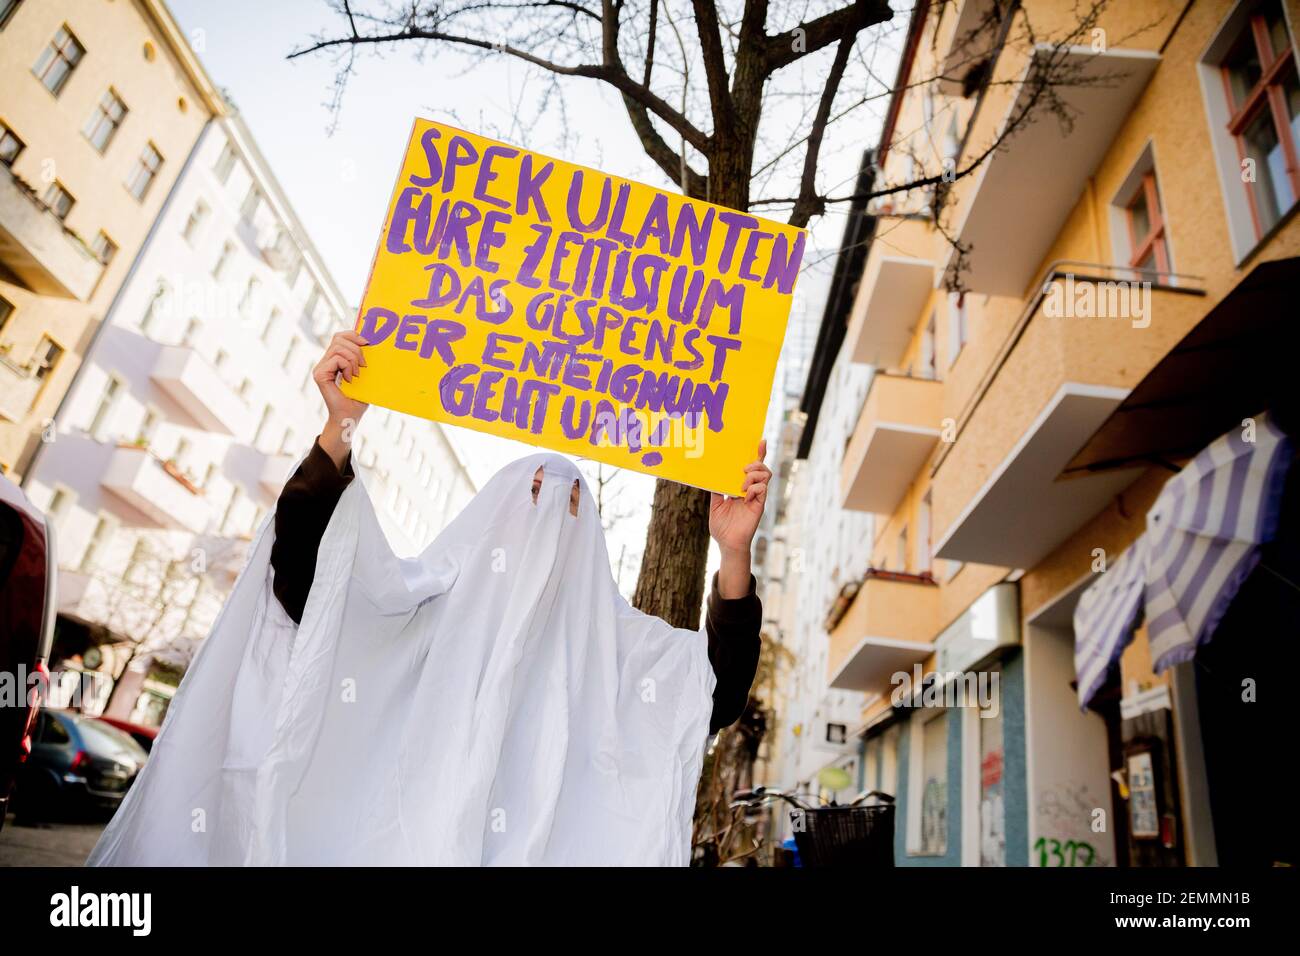 Berlin, Germany. 25th Feb, 2021. An activist in a ghost costume holds a protest sign near the organizing office of the people's petition 'Expropriate Deutsche Wohnen & Co' into the camera. The sign reads 'Spekulanten eure Zeit ist im, das Gespenst der Exteignung geht um!'. On 26.02.2021 begins the second signature phase of the popular initiative to bring about a referendum. The goal is to call on the Berlin Senate to enact a law that regulates the socialization of the apartments of private housing companies, with more than 3000 Berlin apartments. Credit: Christoph Soeder/dpa/Alamy Live News Stock Photo